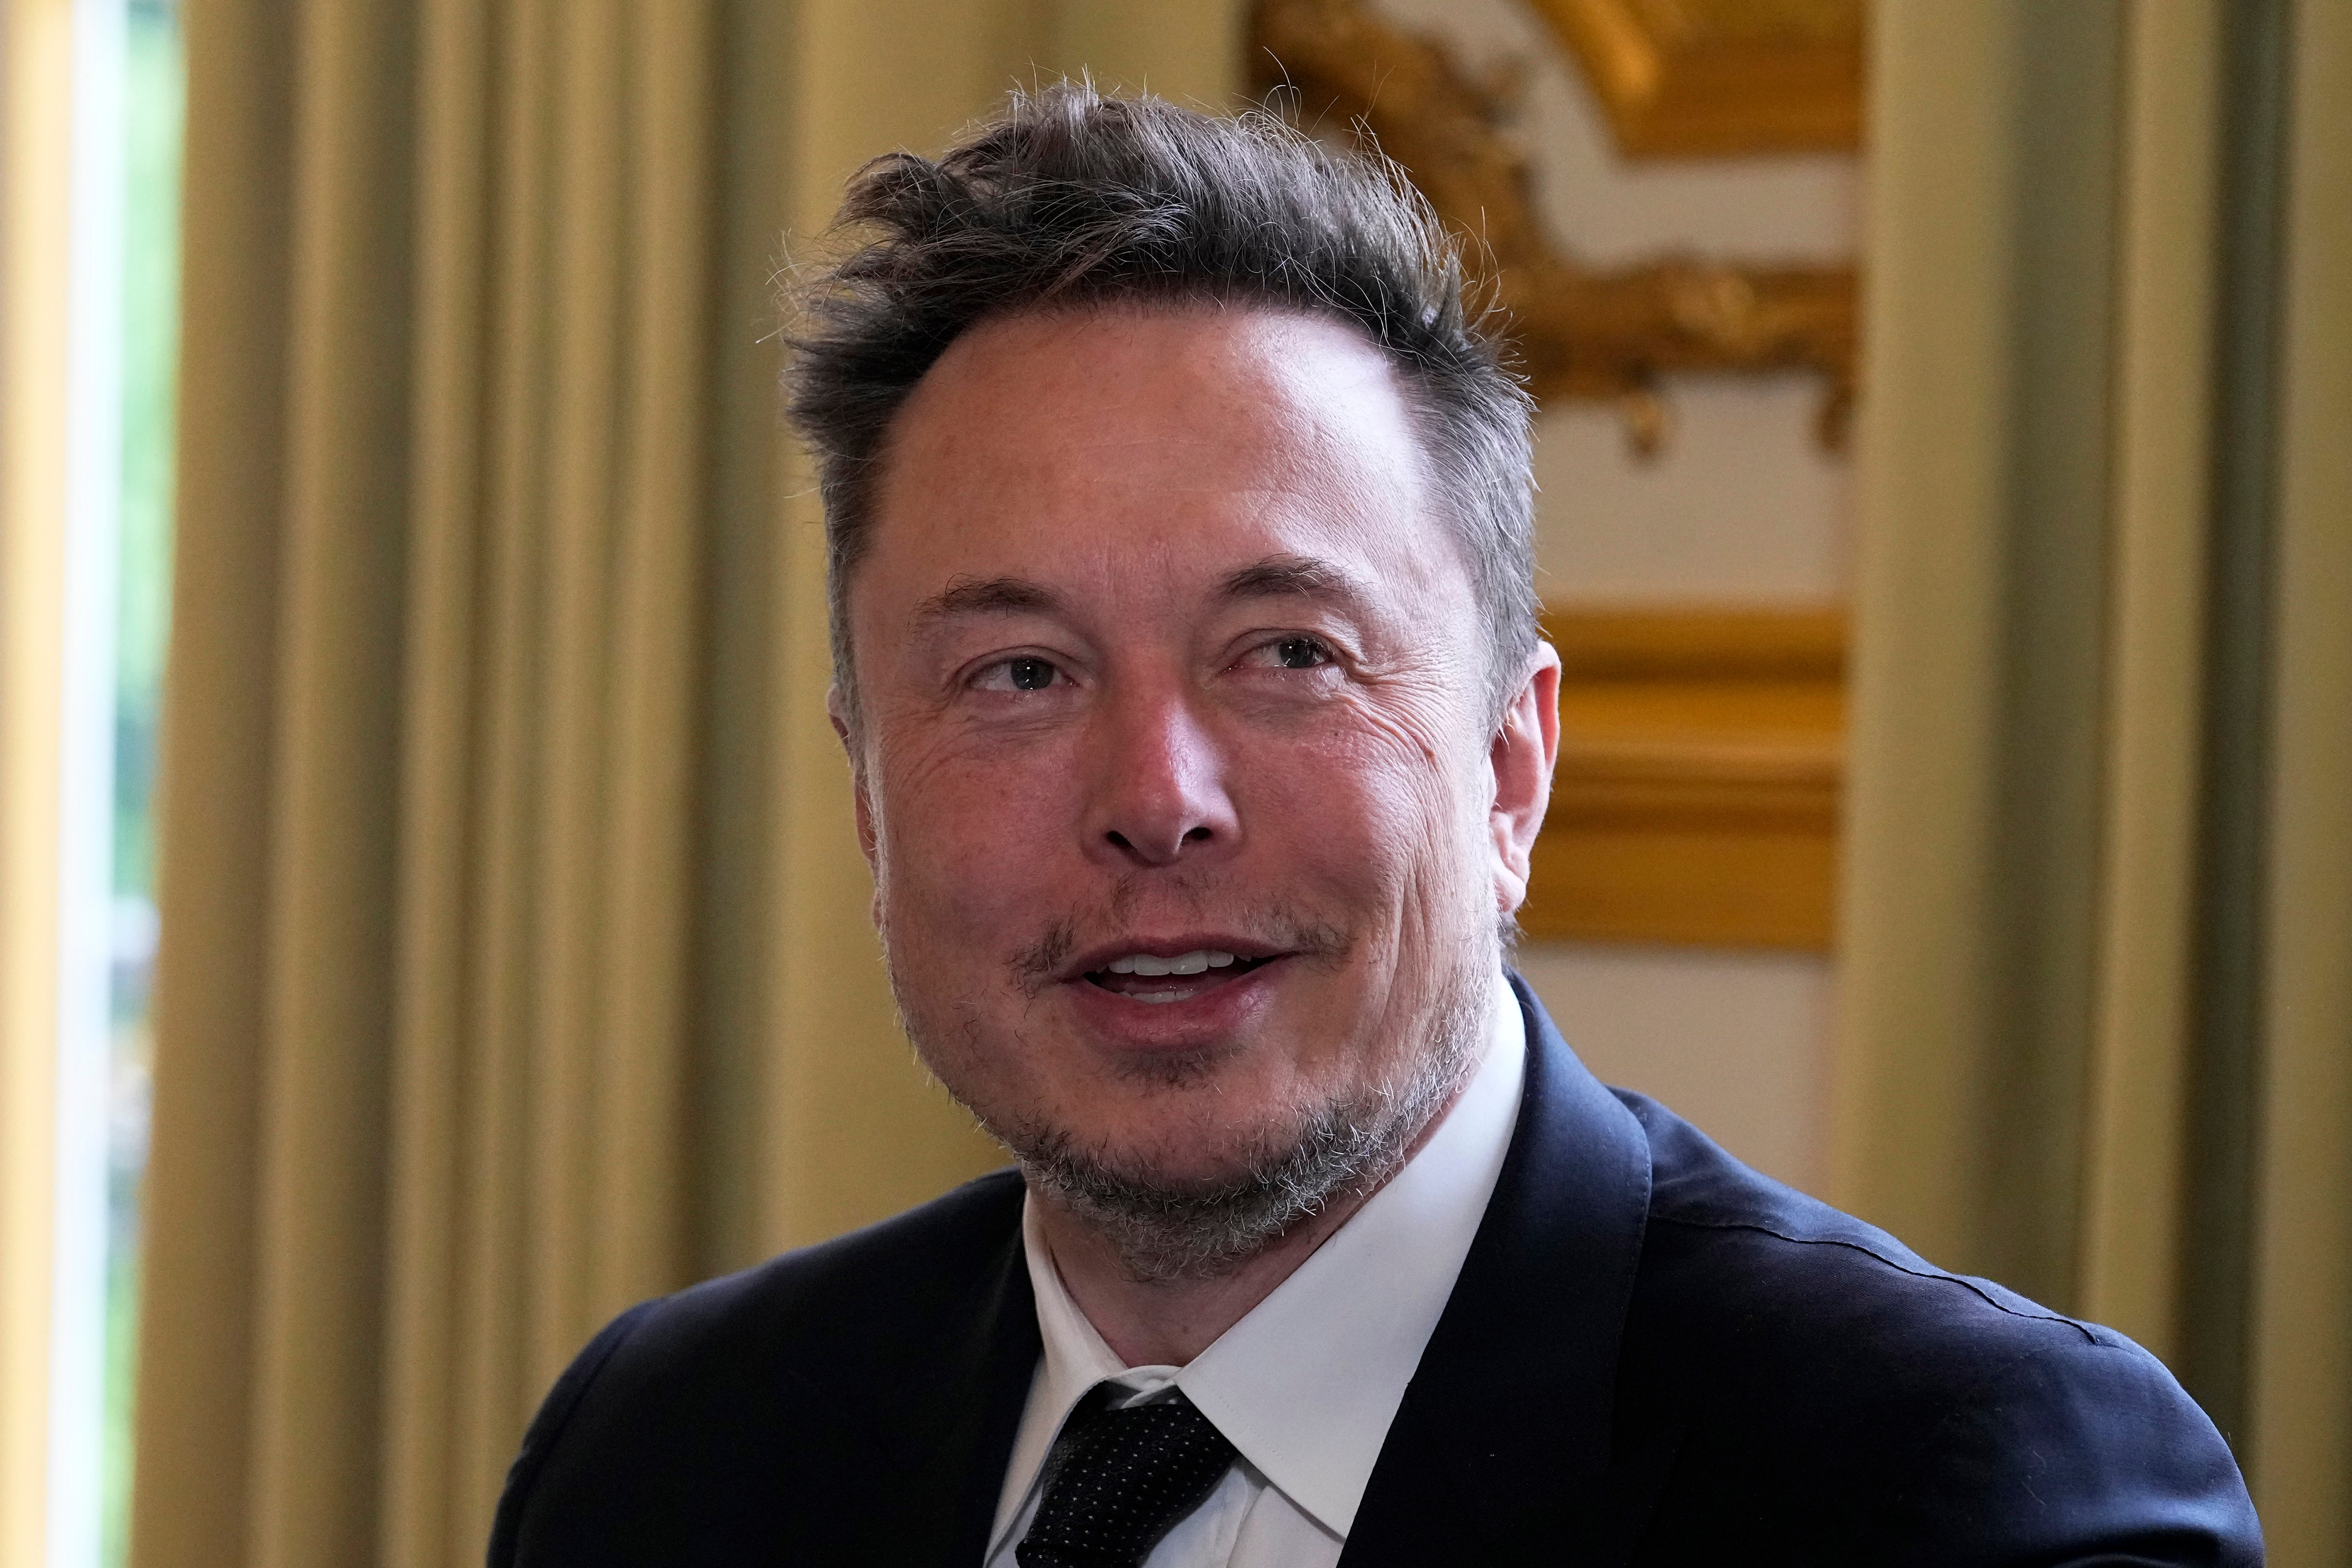 Jeffrey Epstein may have referred Elon Musk as a client to JP Morgan, according to a court filing